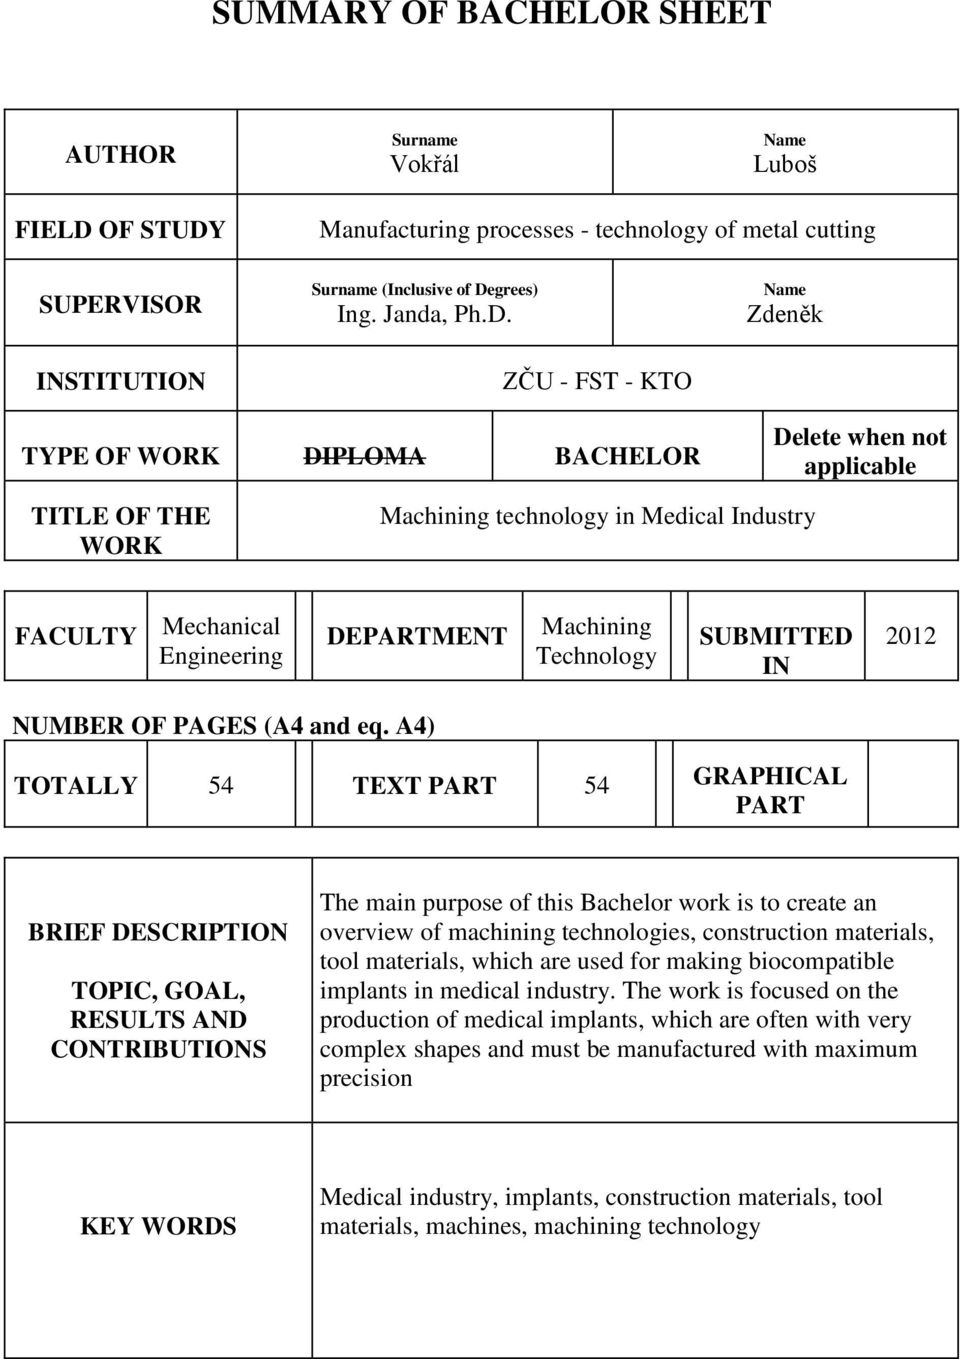 Manufacturing processes - technology of metal cutting SUPERVISOR INSTITUTION Surname (Inclusive of De